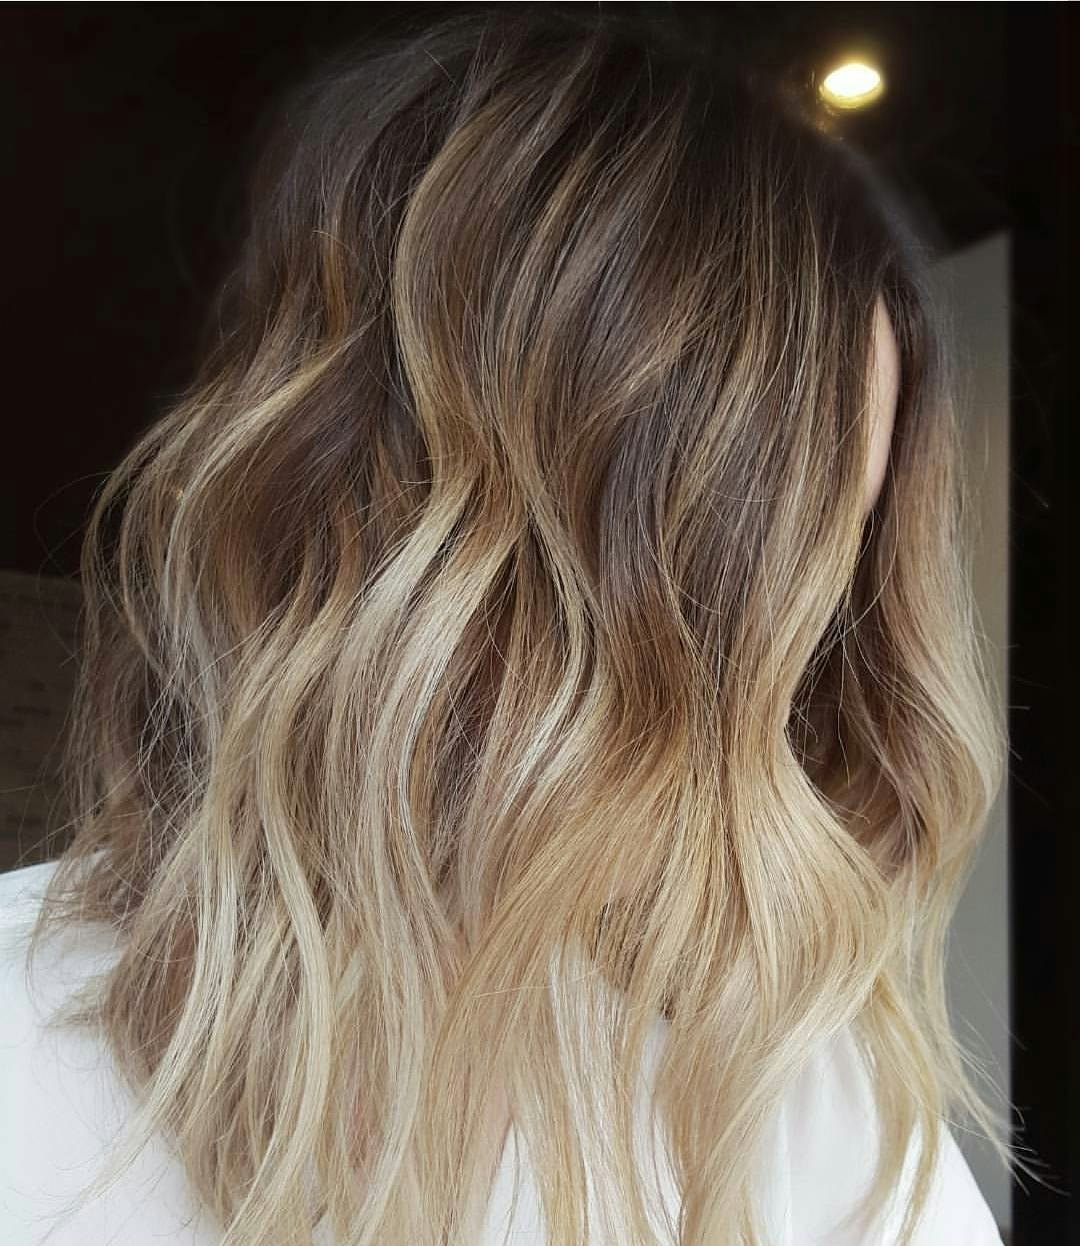 These Are The 8 Hair Color Trends Taking Over Instagram Right Now